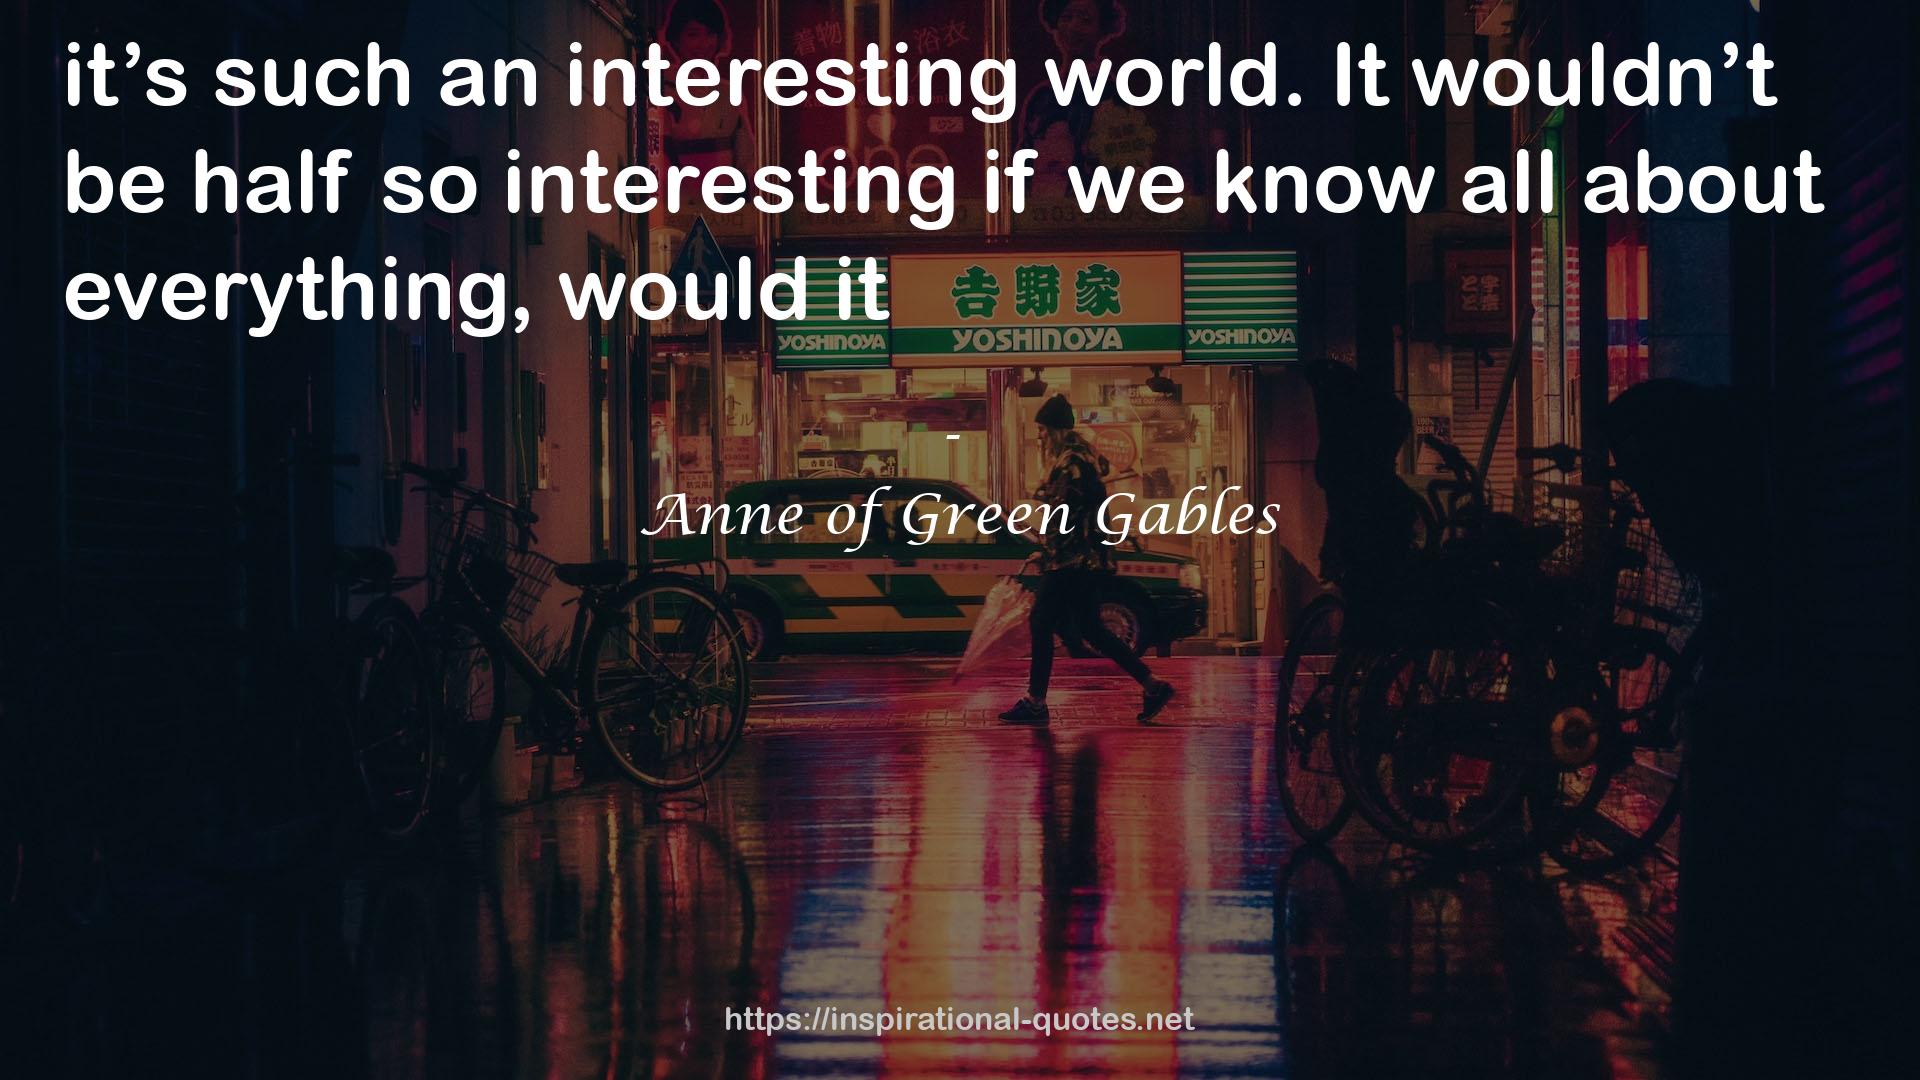 Anne of Green Gables QUOTES